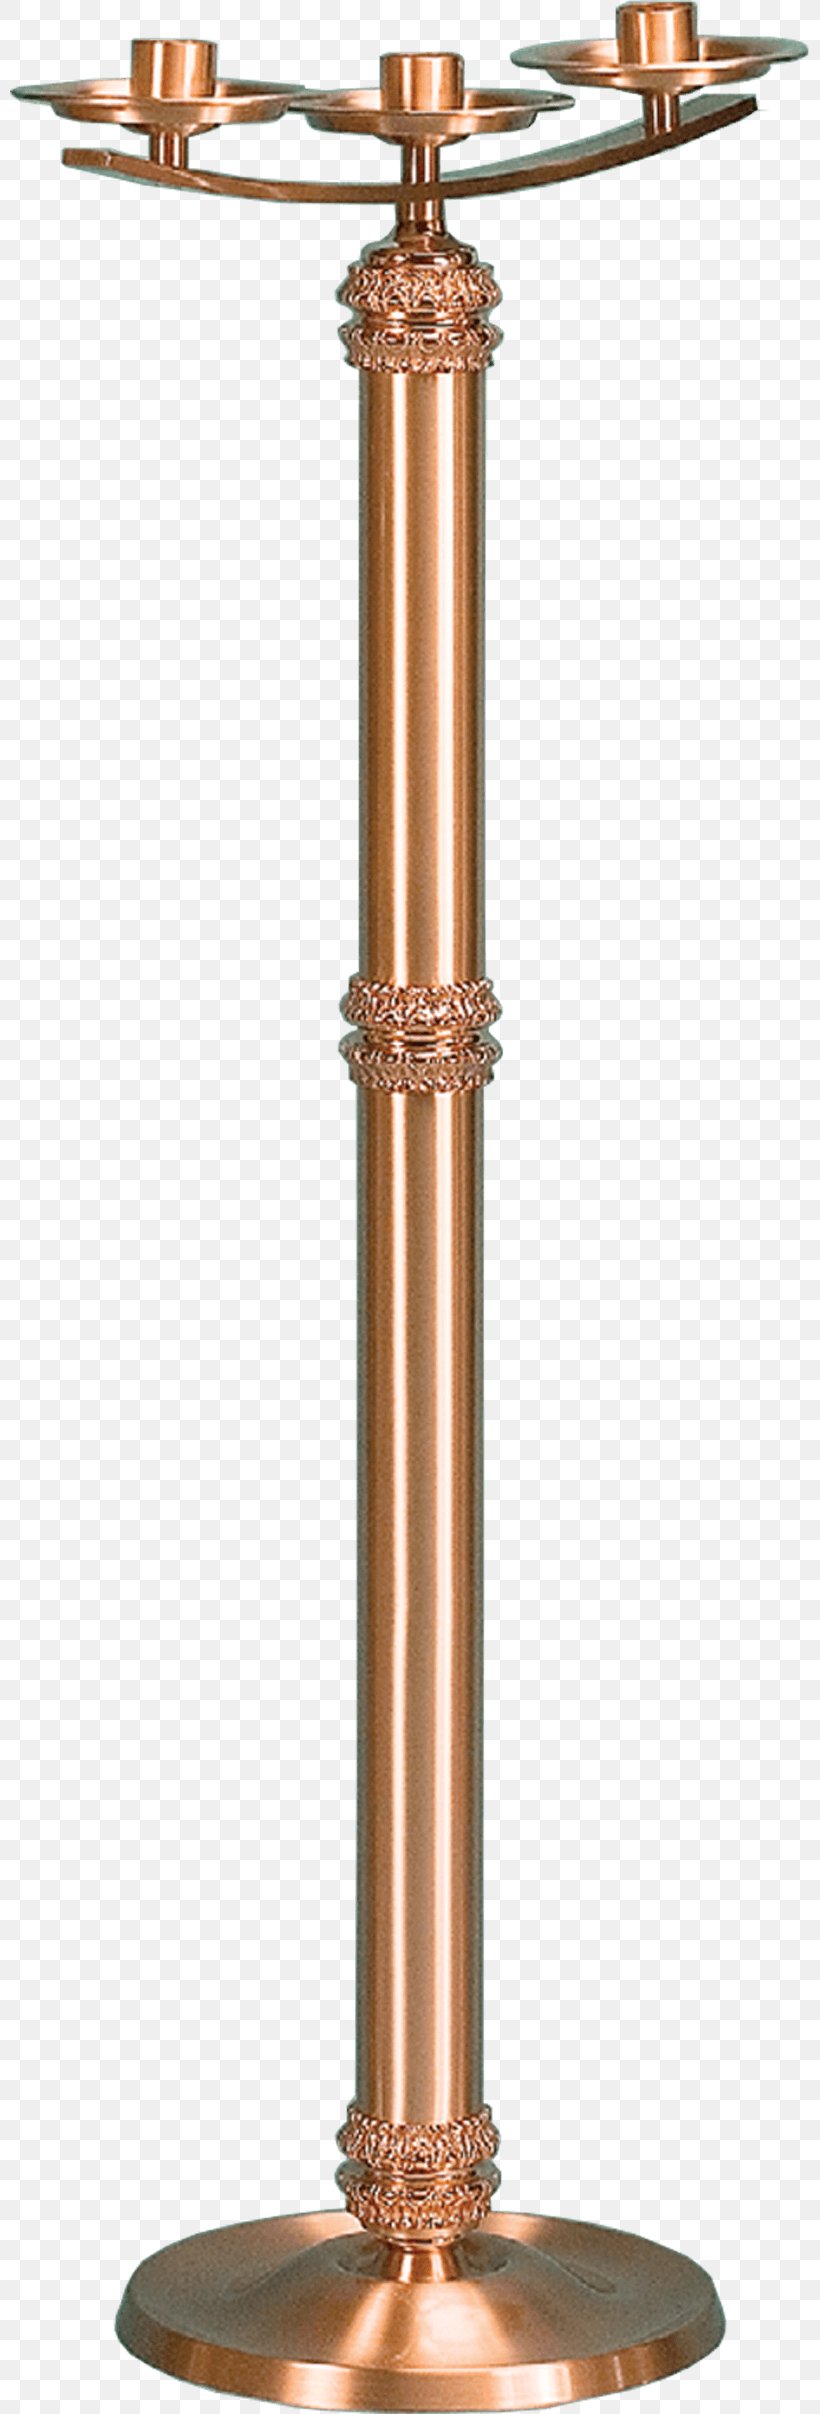 Brass 01504 Copper, PNG, 800x2414px, Brass, Ceiling, Ceiling Fixture, Copper, Light Fixture Download Free